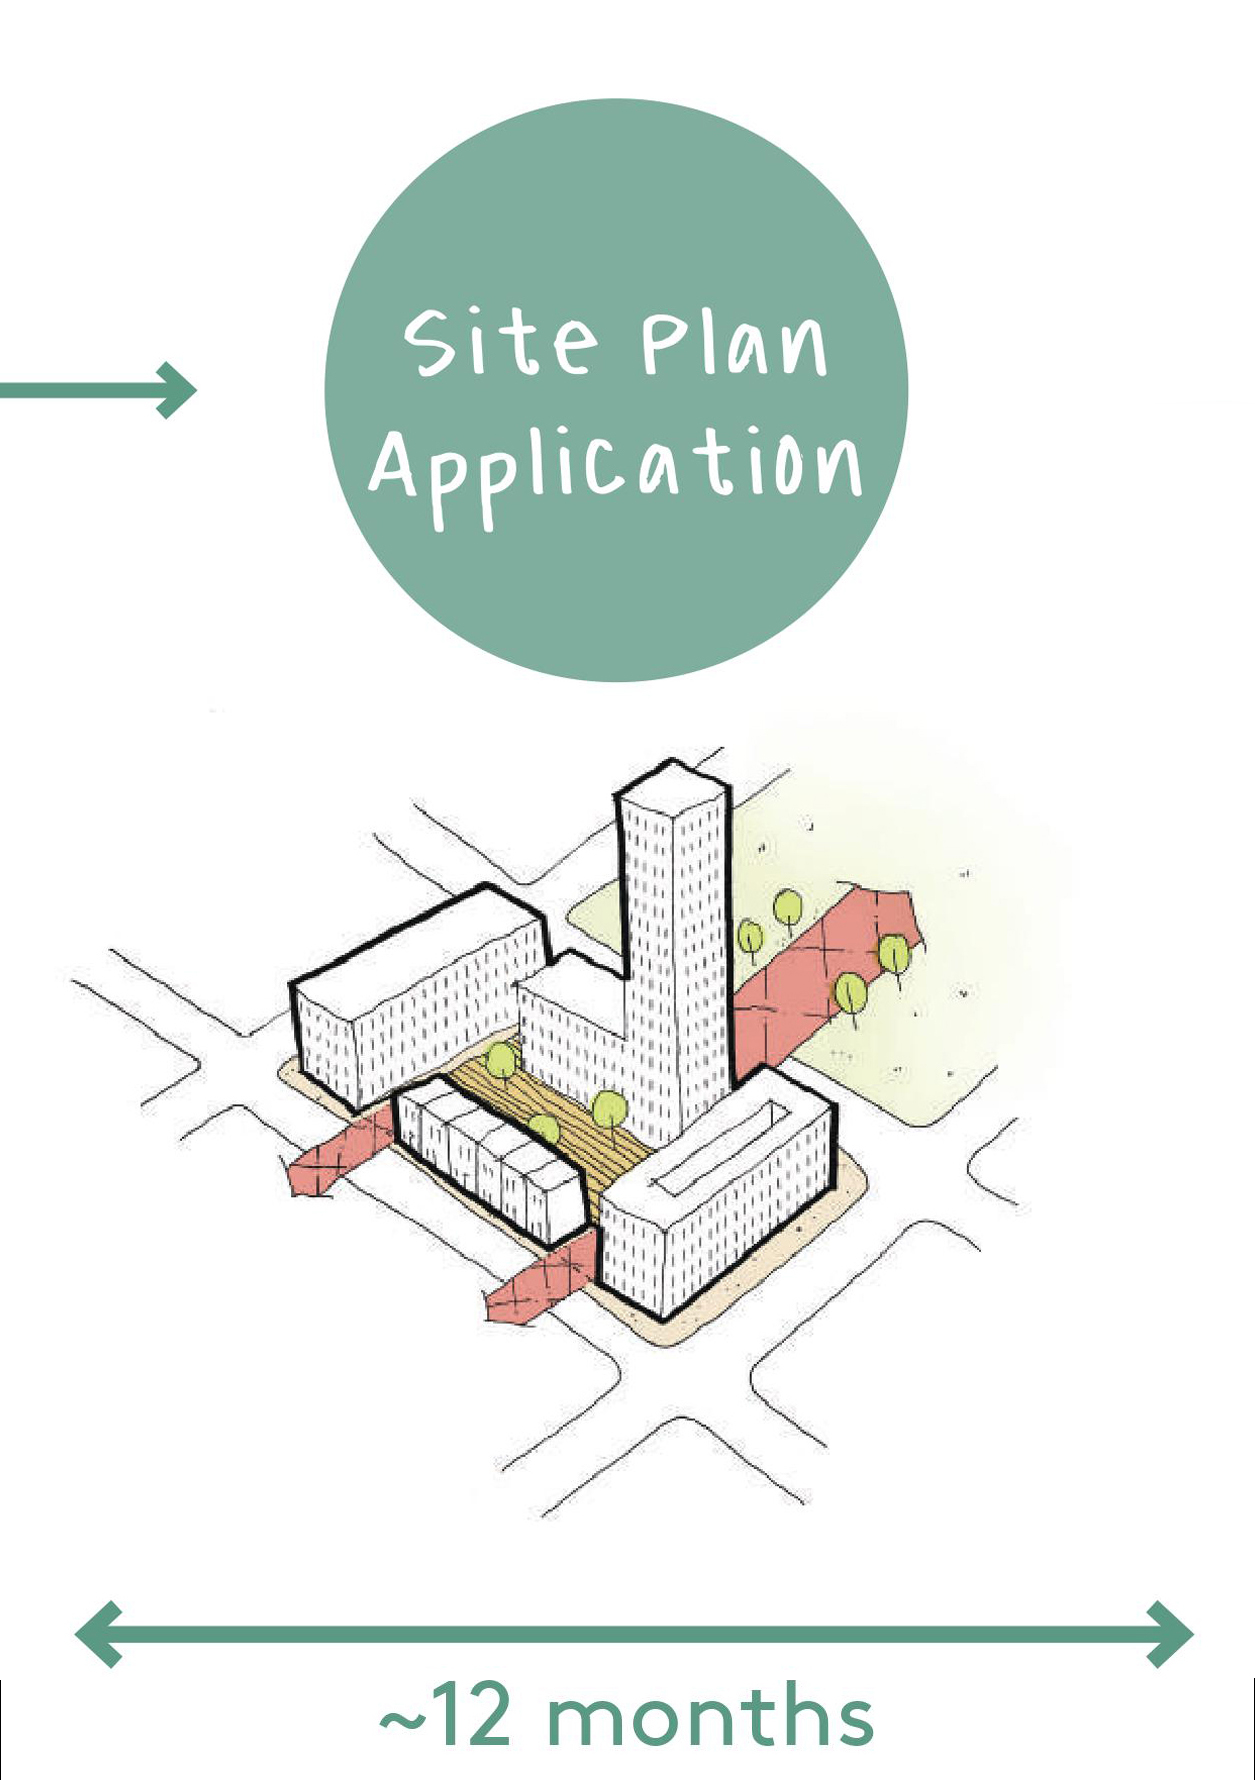 Site Plan Application, approximately 12 months